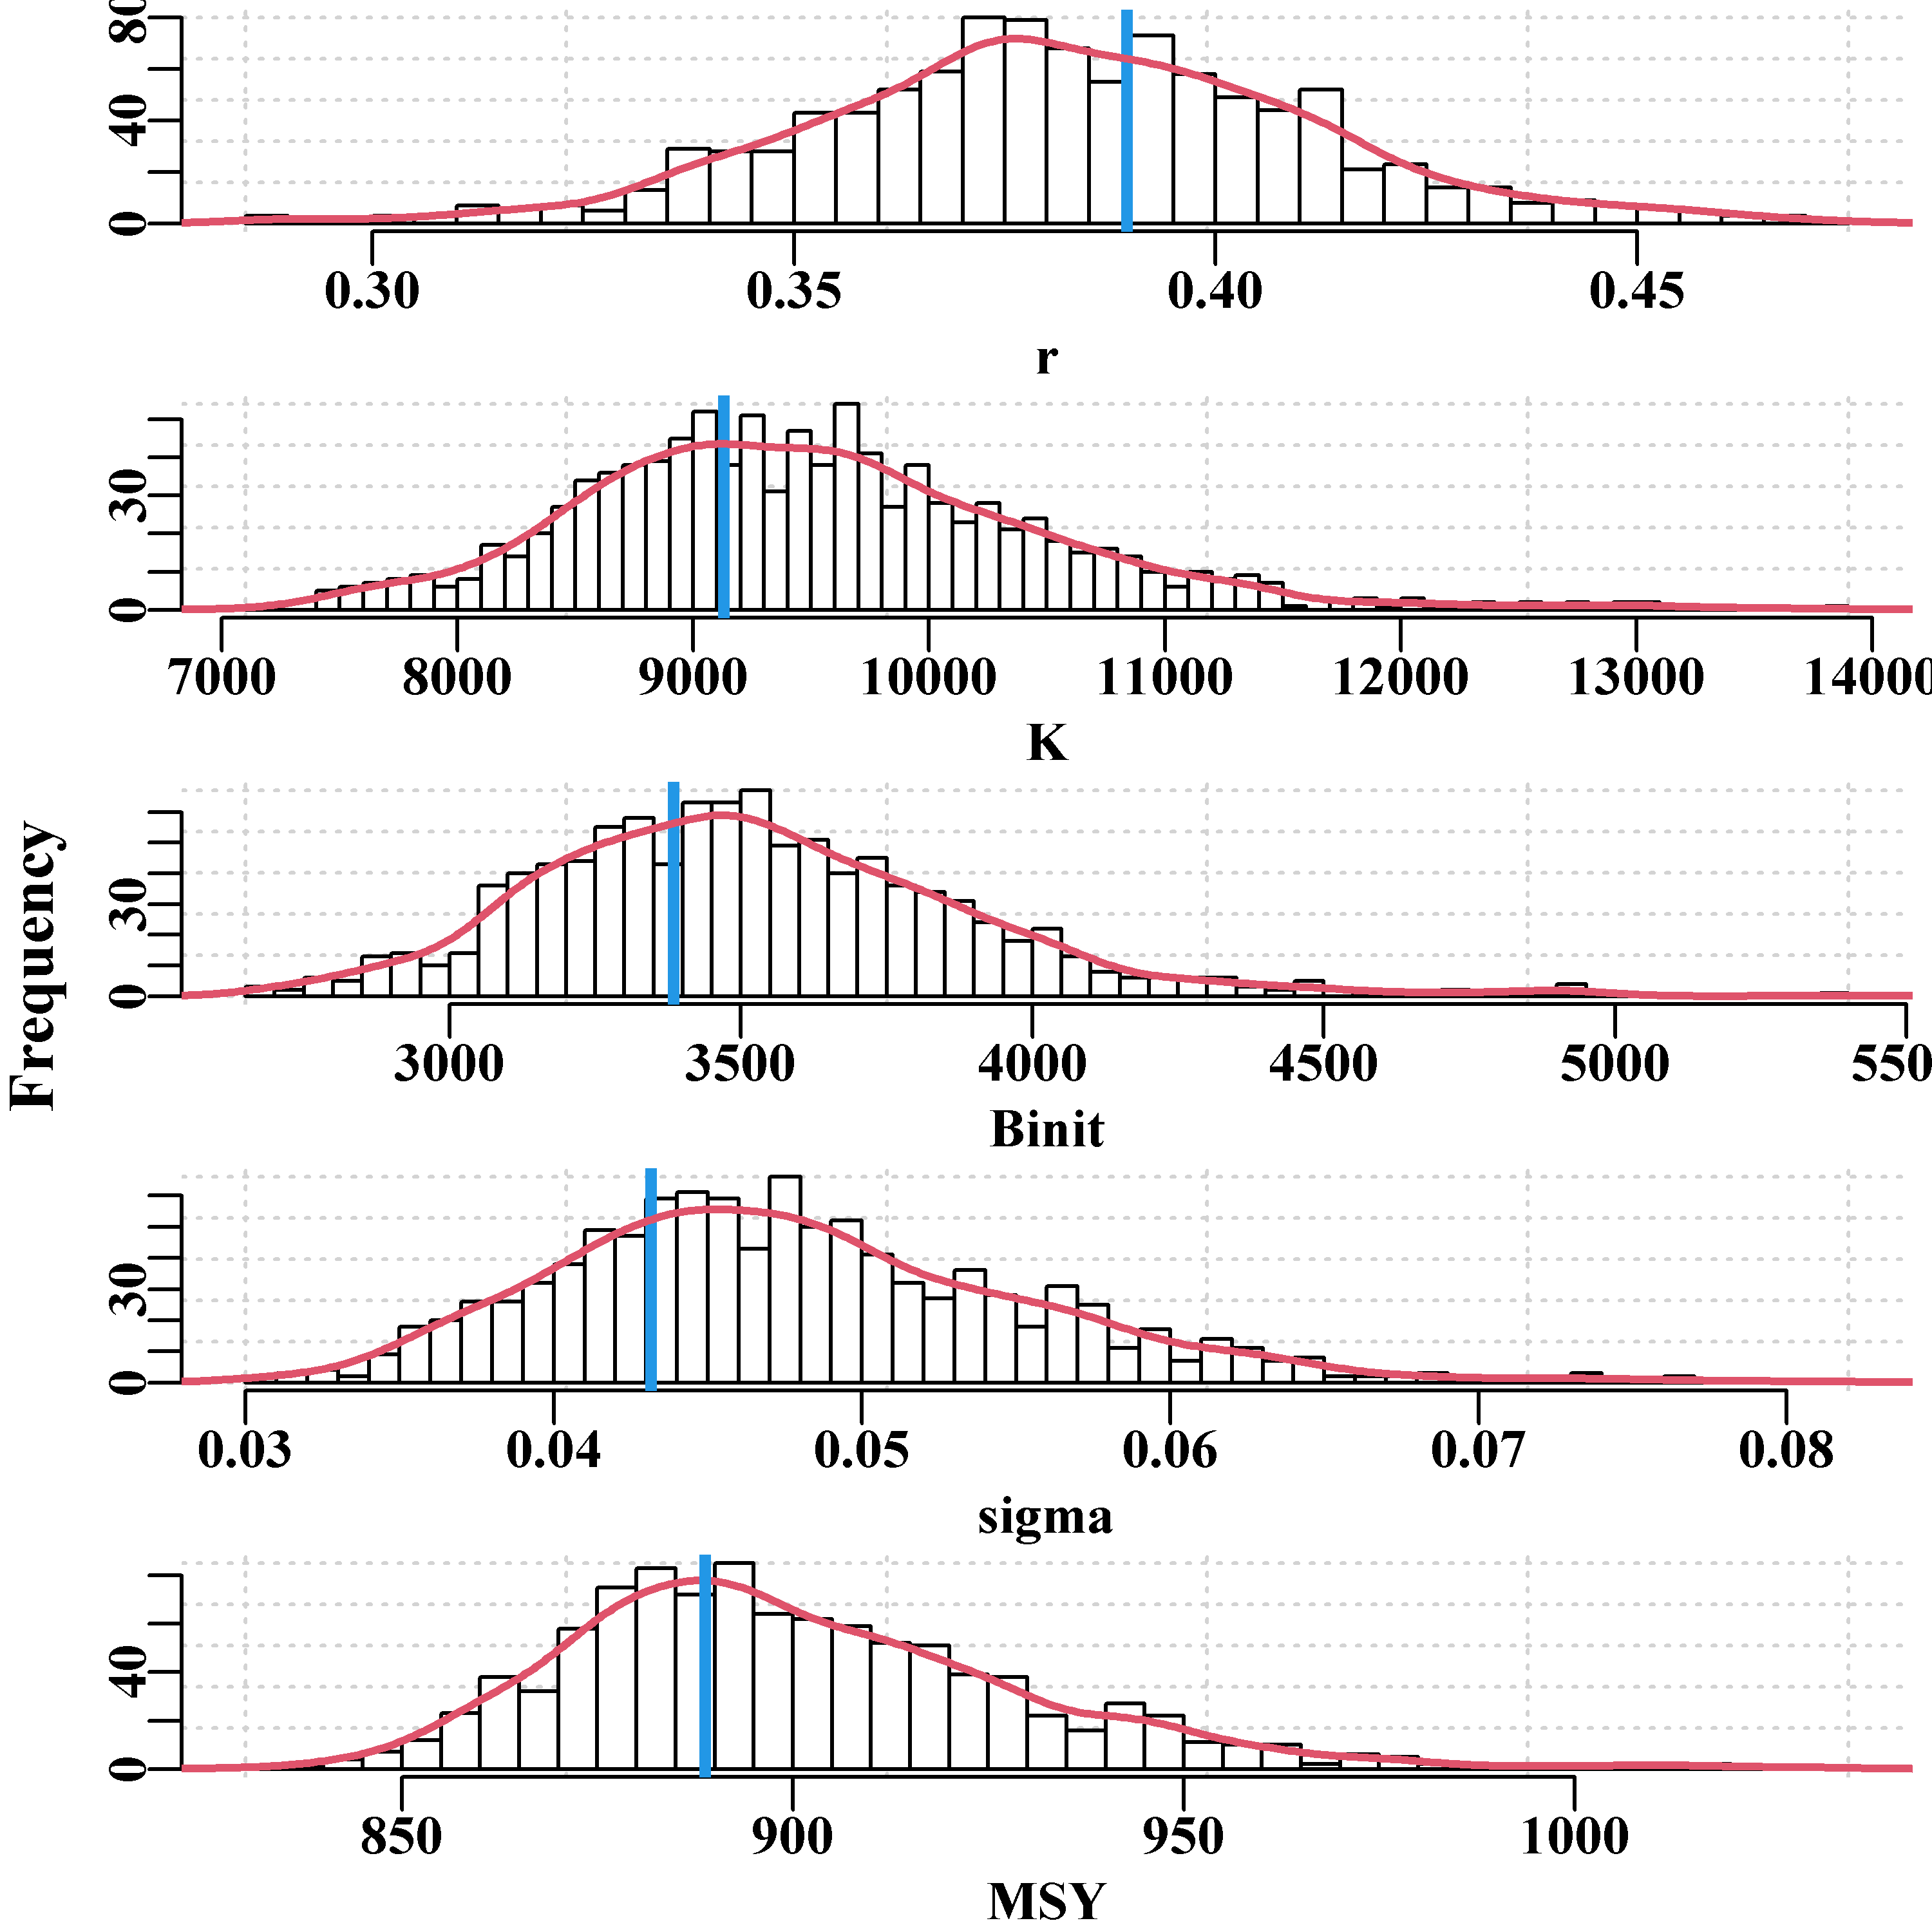 The marginal posterior distributions for the 1000 points at a thinning rate of 128. The vertical blue line, in each case, is the maximum likelihood optimum estimate. More replicates may be needed to smooth the distributions. The posterior mode is not necessarily the same as the maximum likelihood estimate.